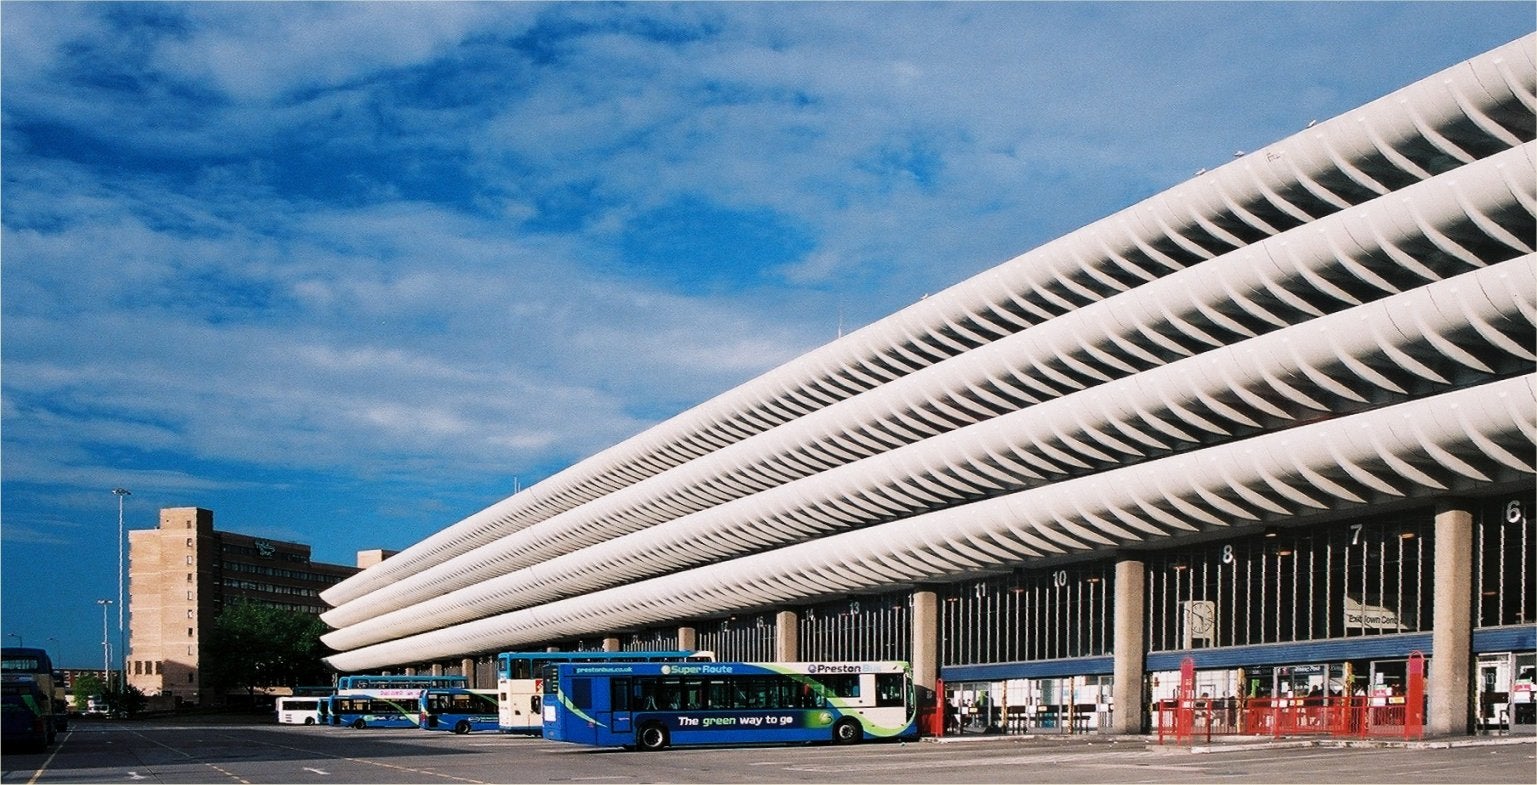 Preston bus station will be the centre point of a new £40,000 commissioned artwork